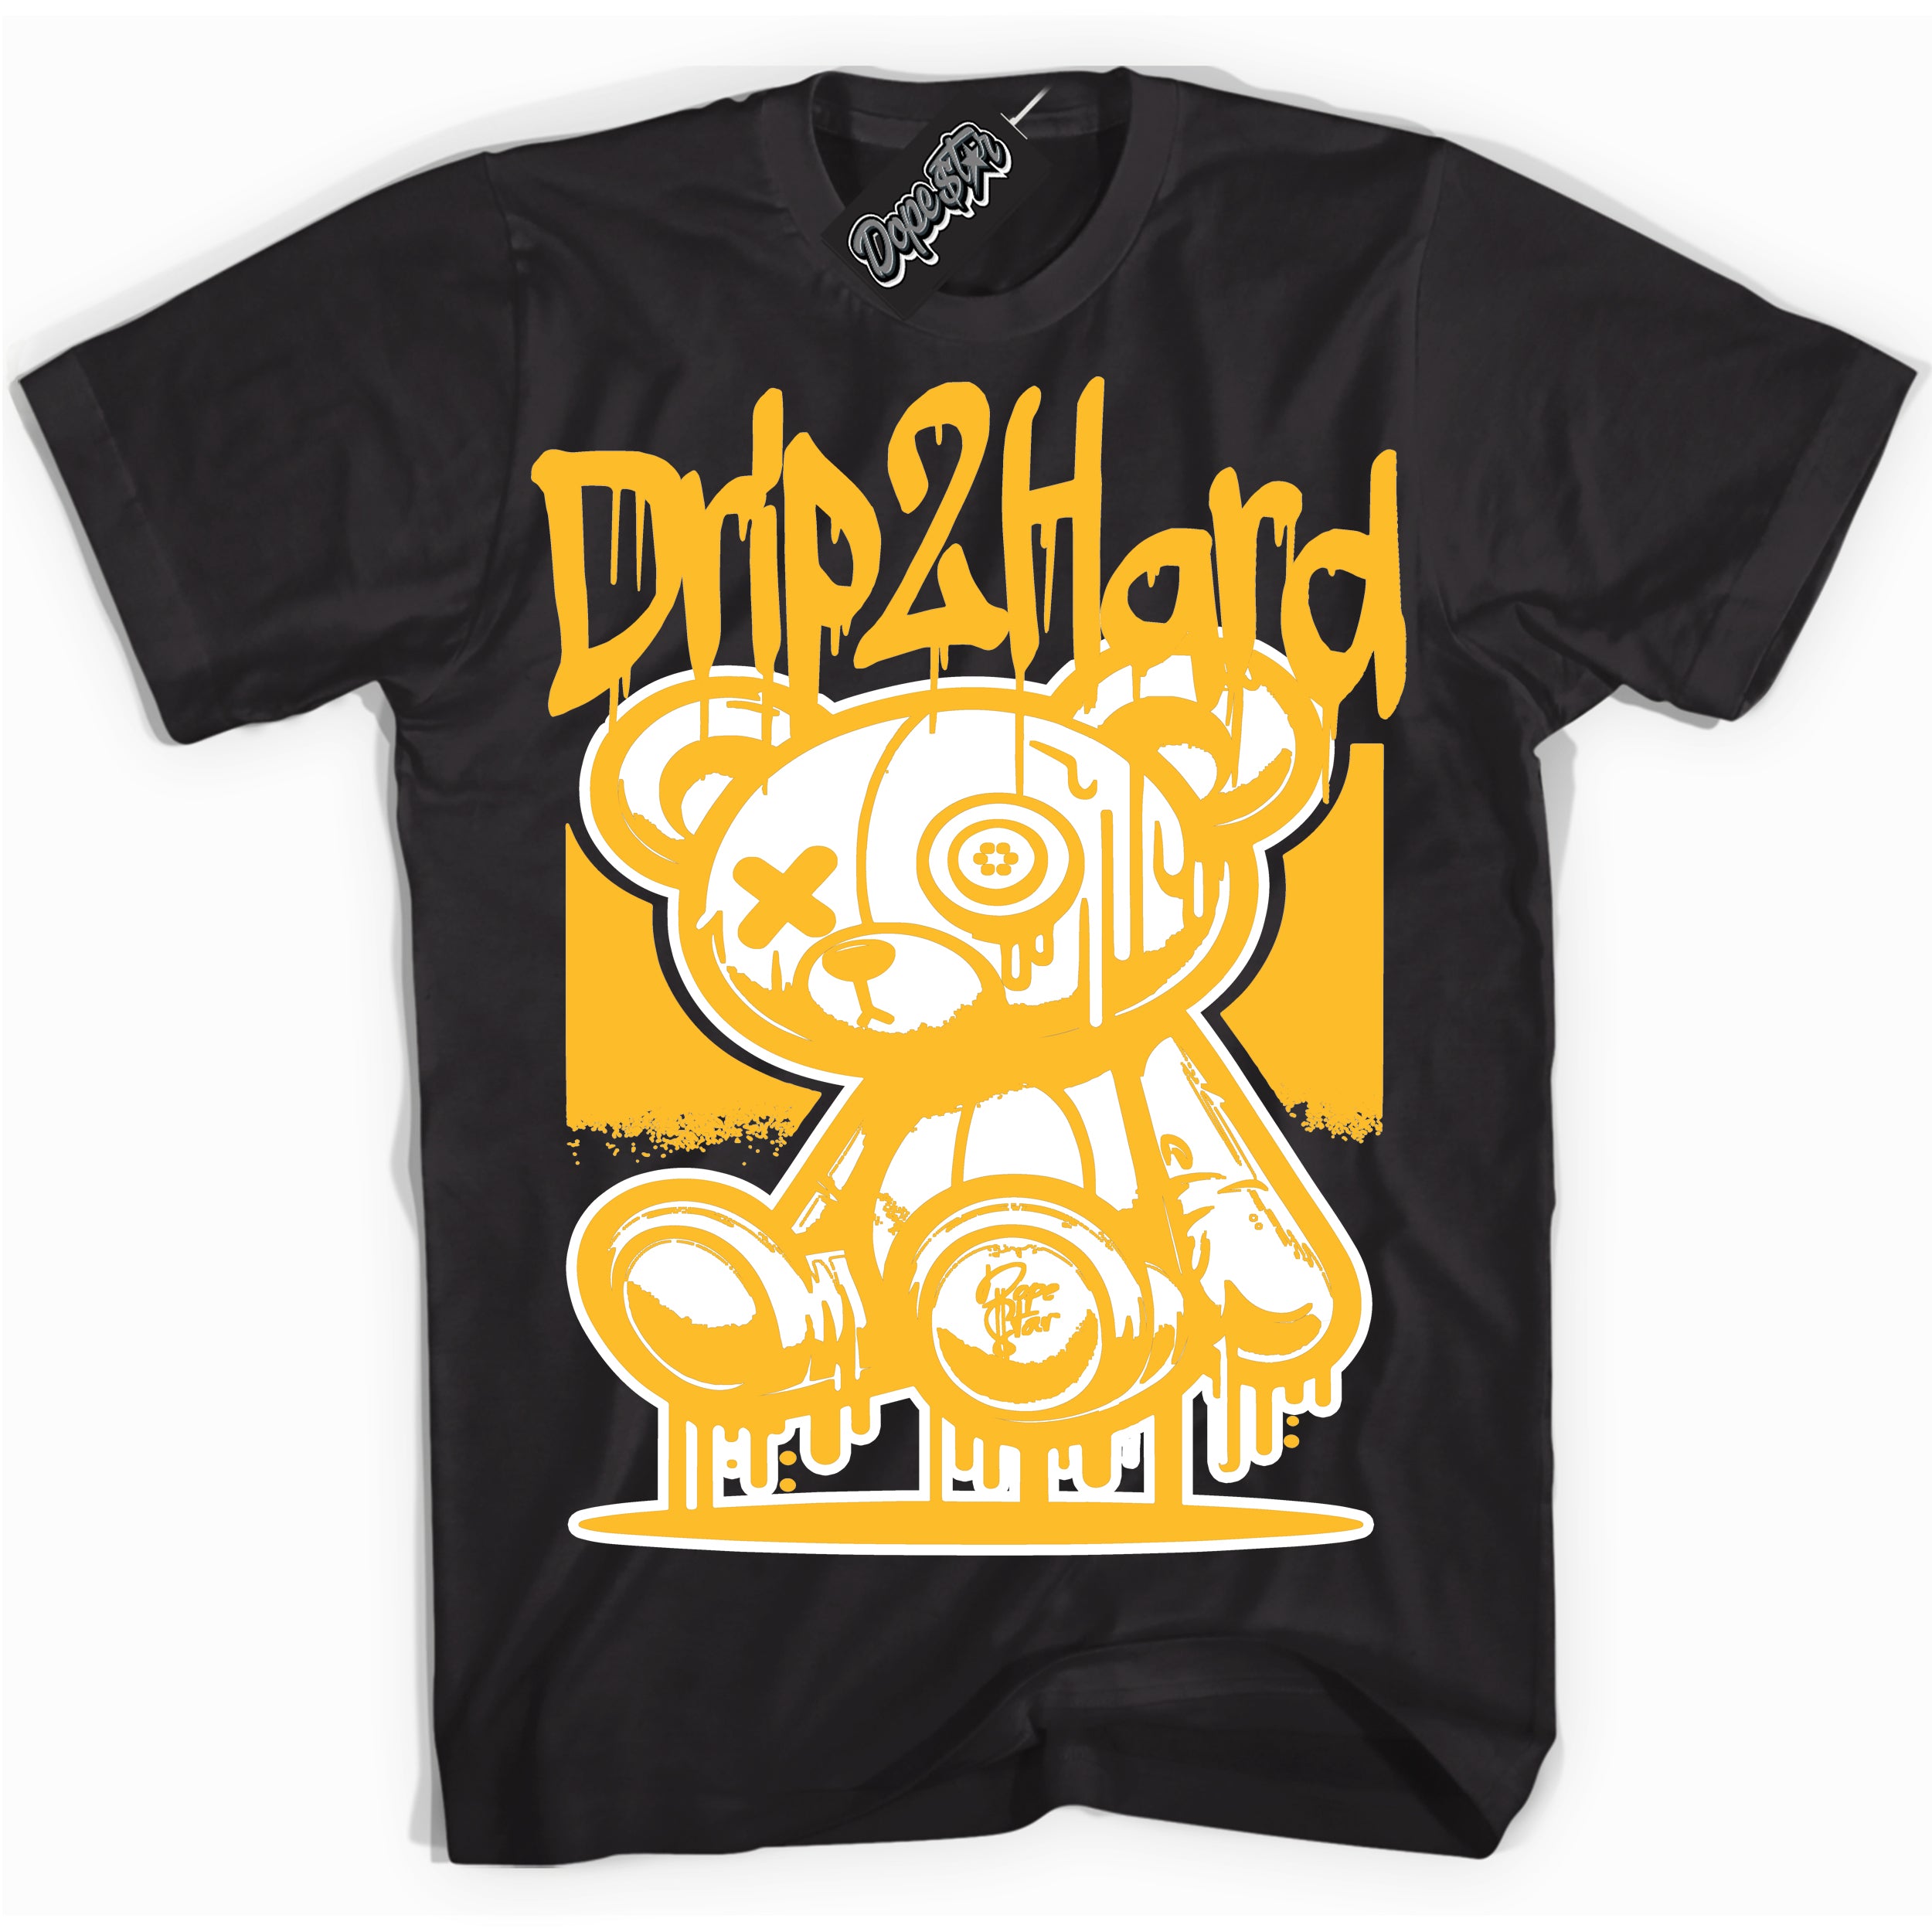 Cool Black graphic tee with “ Drip 2 Hard ” design, that perfectly matches White University Gold 1s